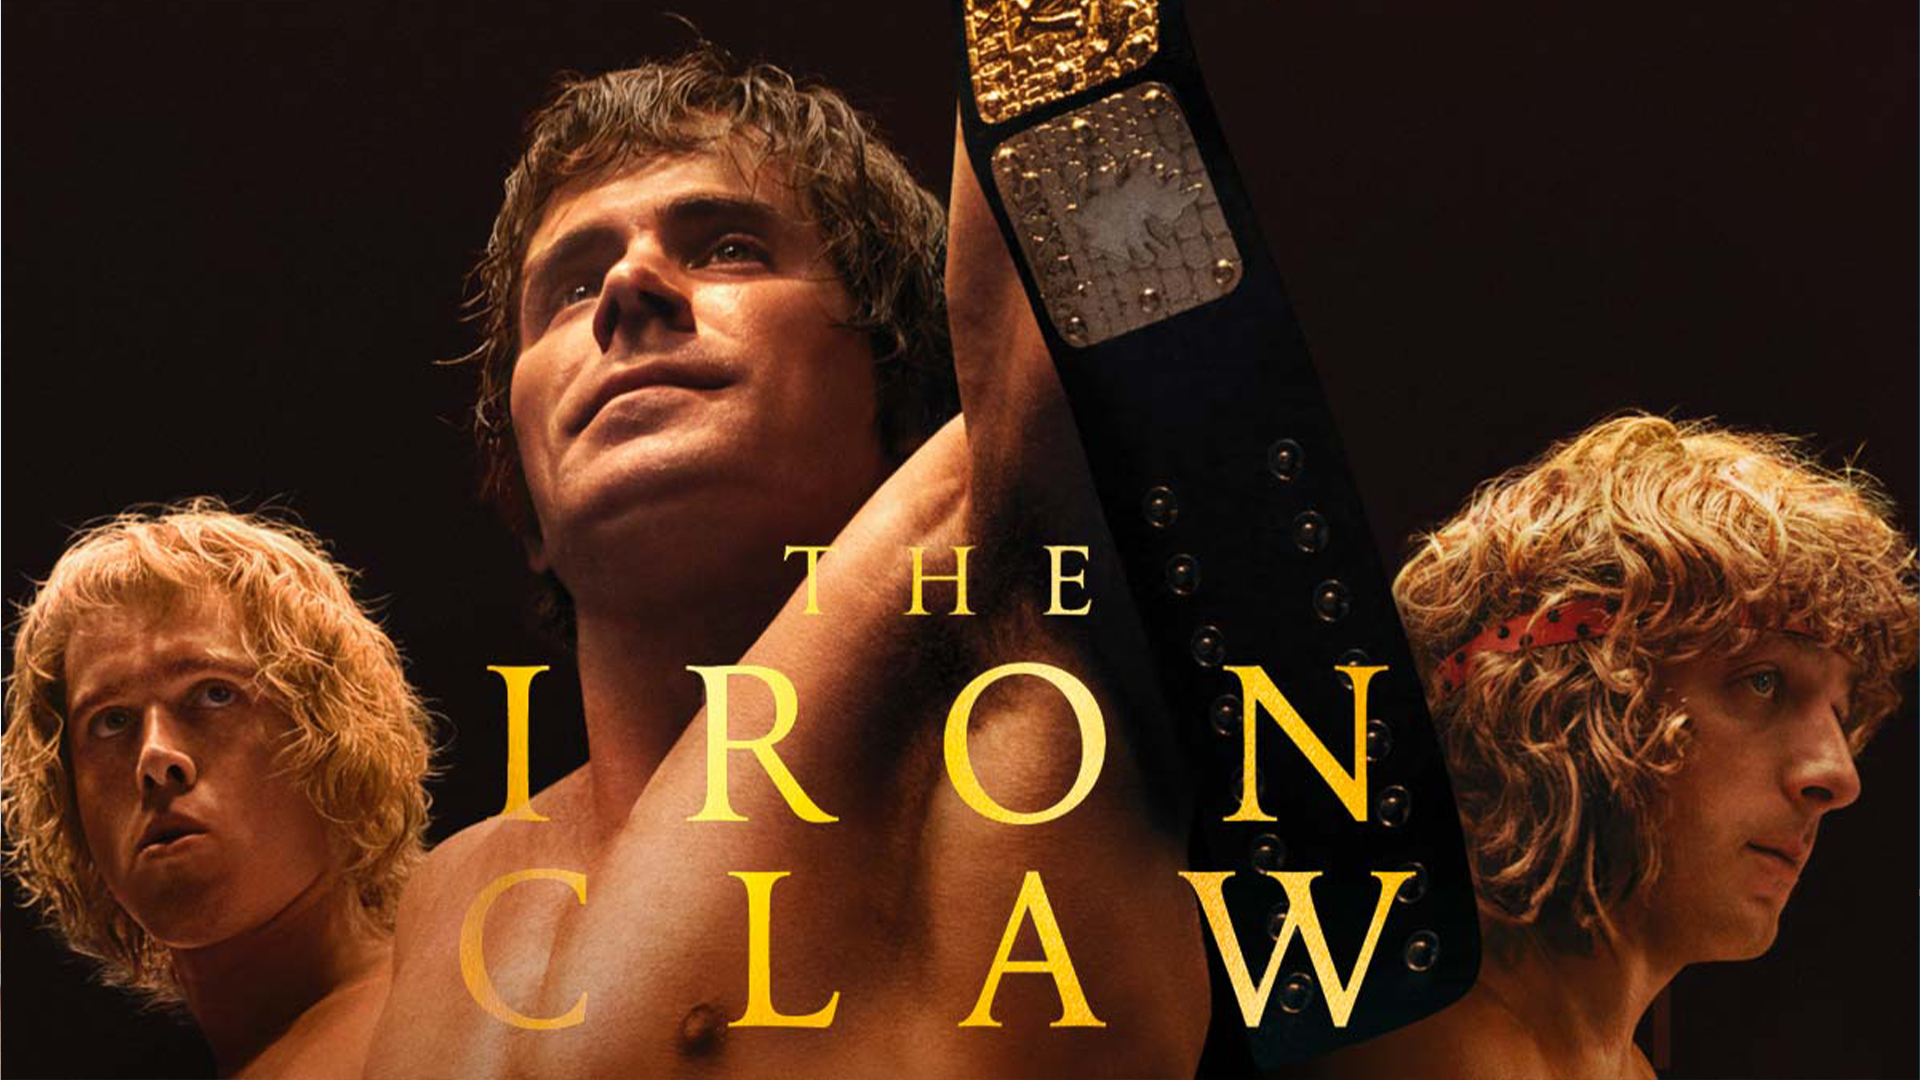 Silver Screening: The Iron Claw